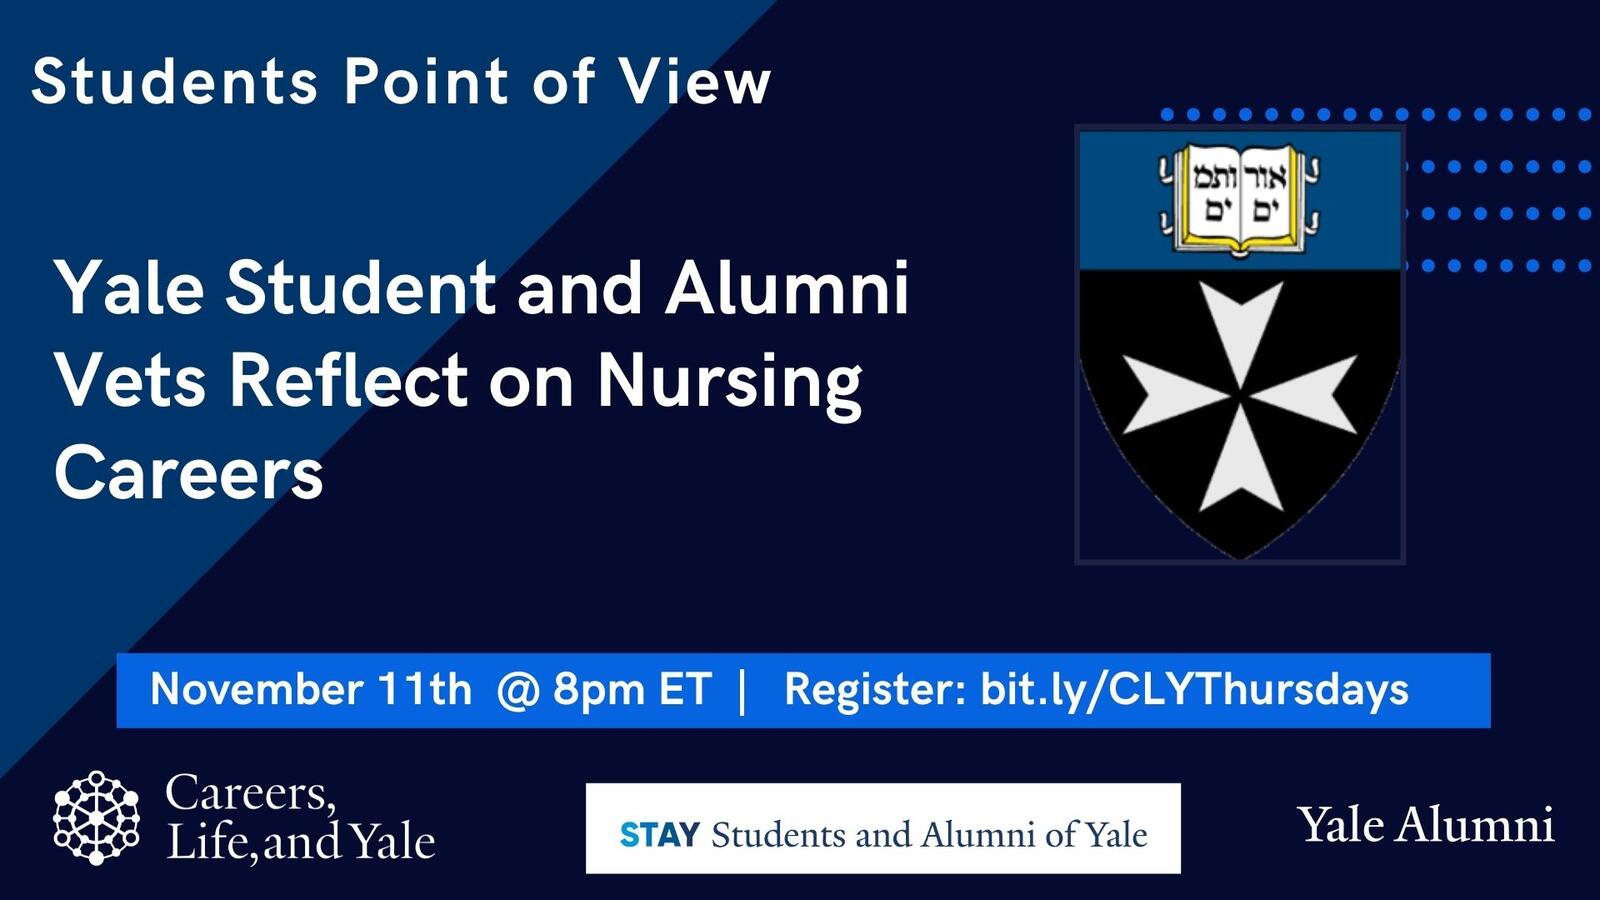 Yale Student and Alumni Vets Reflect on Nursing Careers